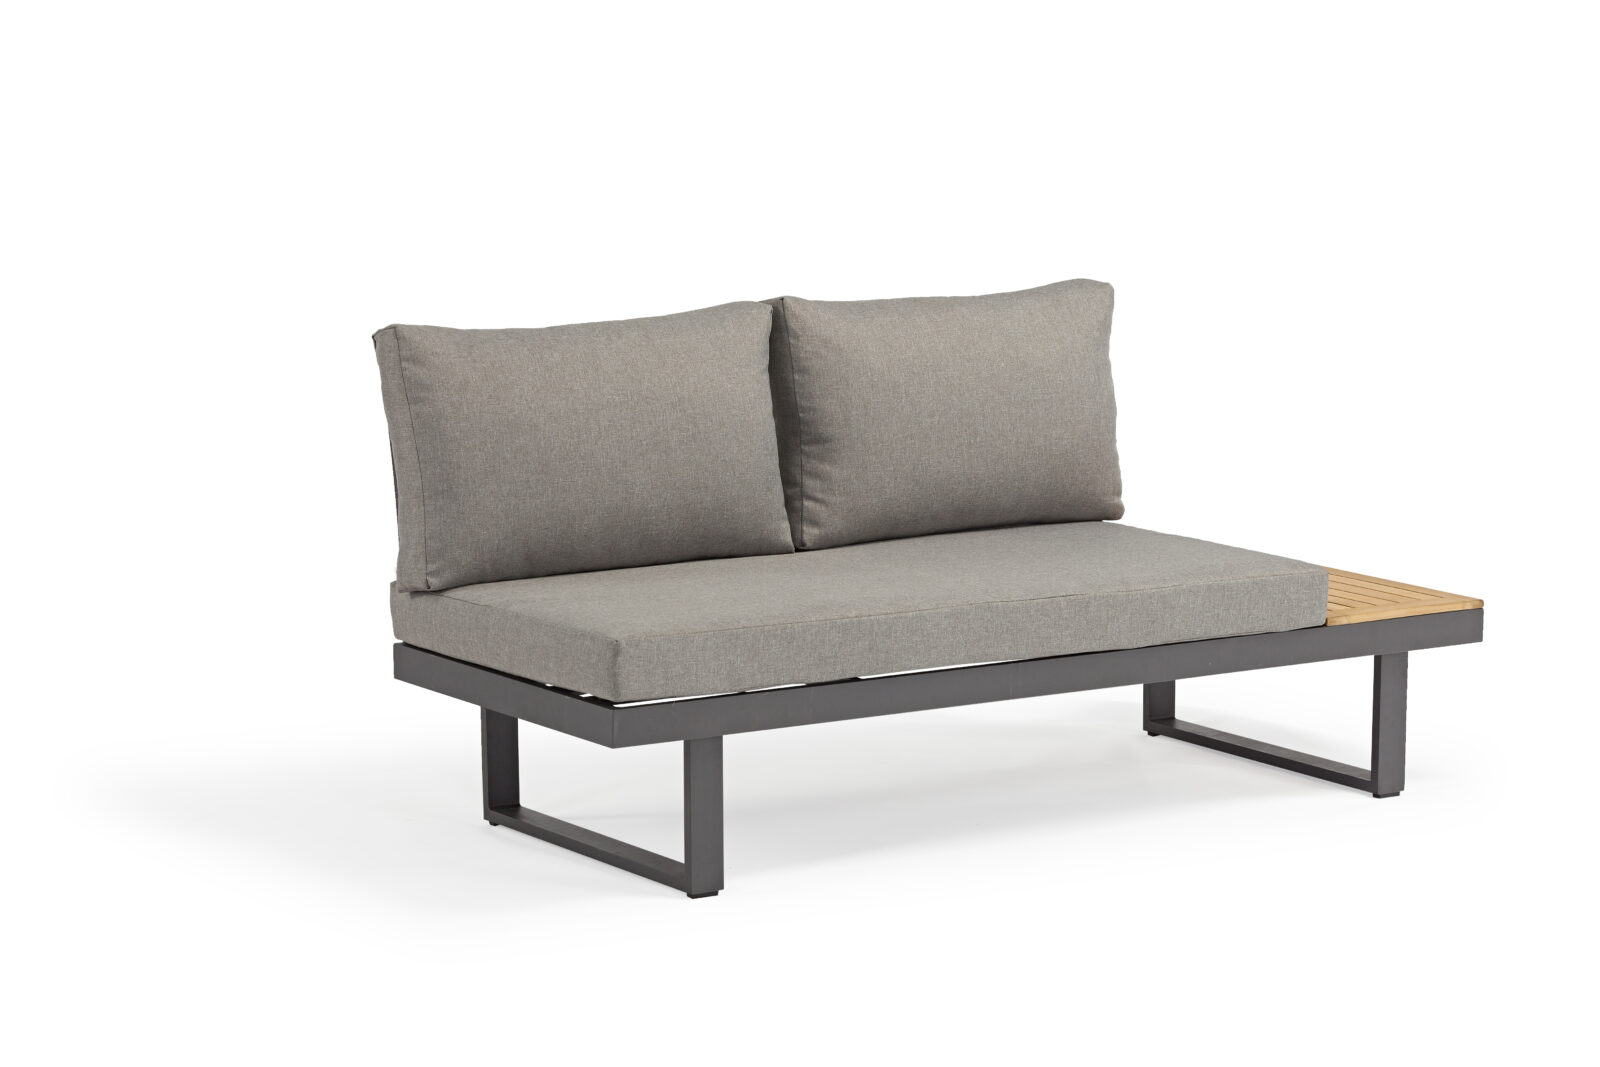 Loungeset Olympia | Multifunctioneel | 4-persoons Olympia loungeset 35130 14 scaled